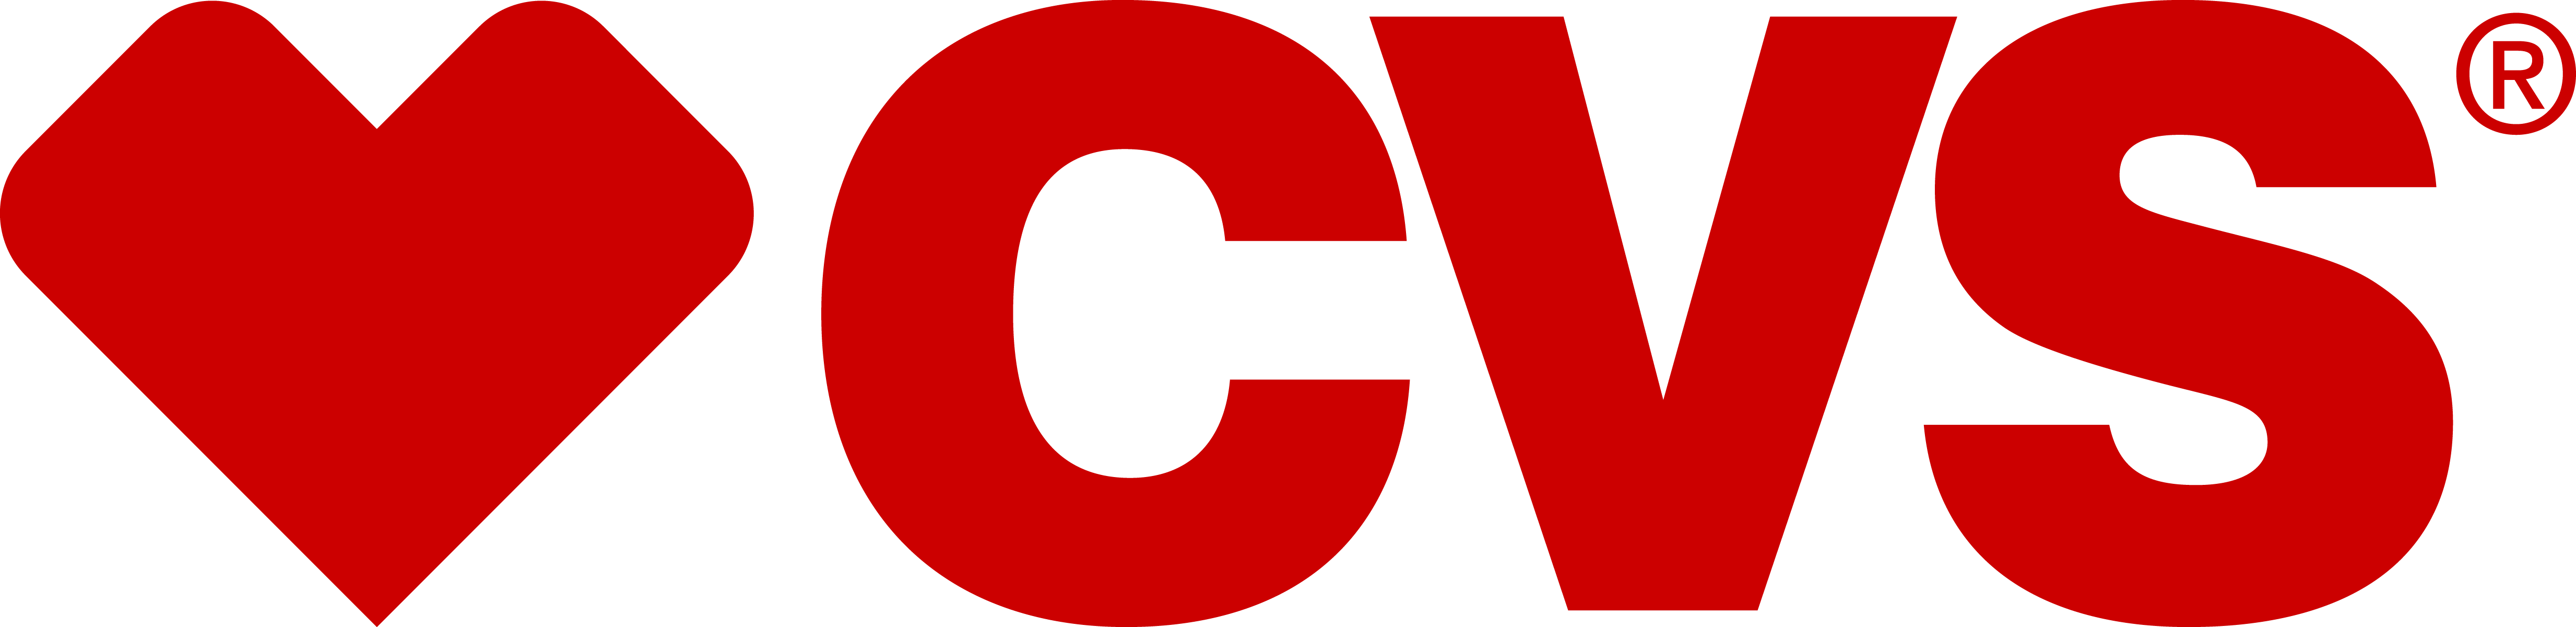 CVS logo in red with heart on the left